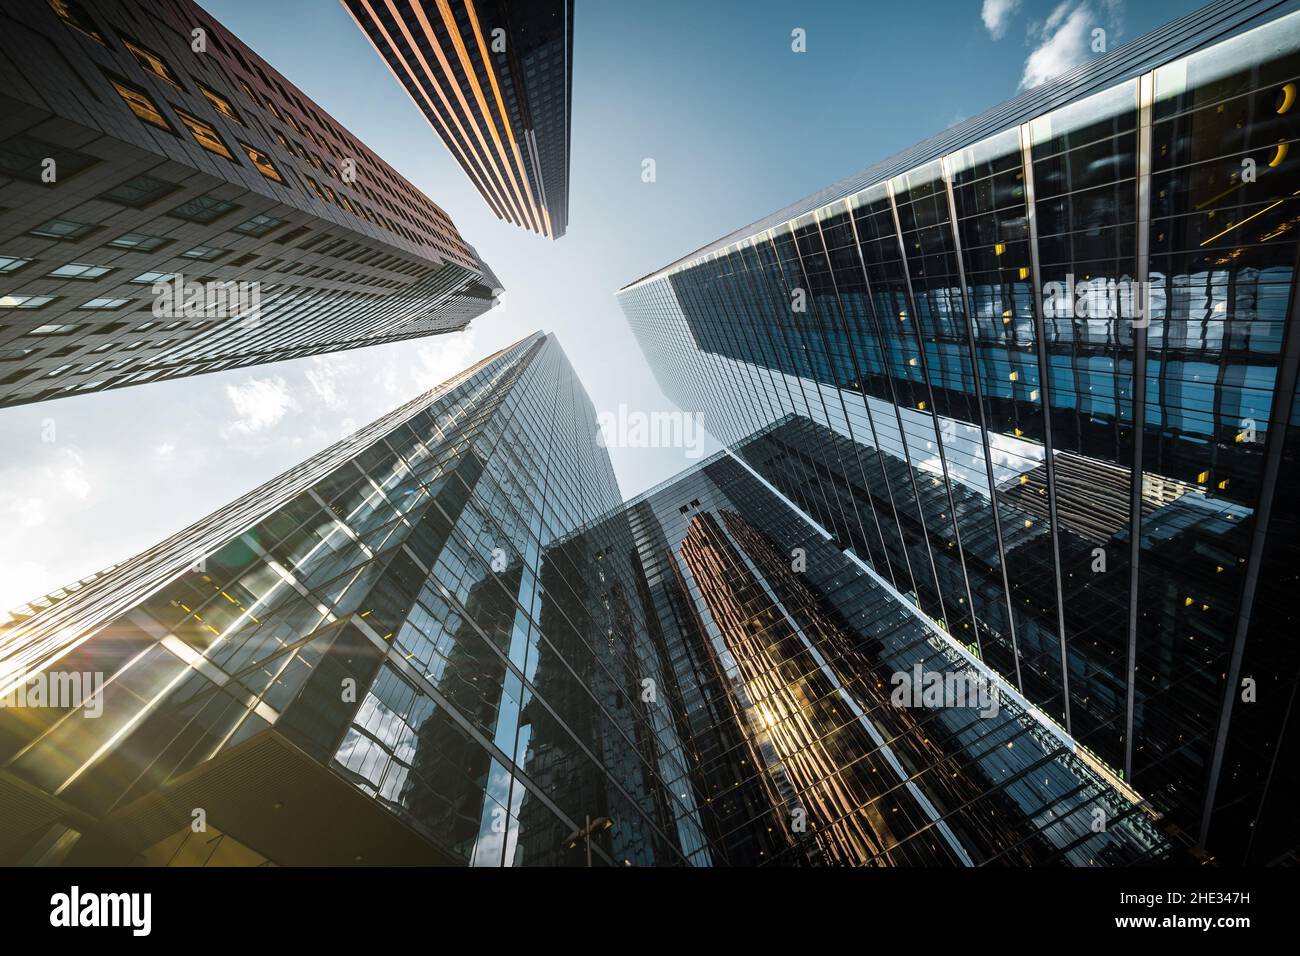 Business and finance concept, looking up at high rise office buildings in the financial district of a modern metropolis. Stock Photo